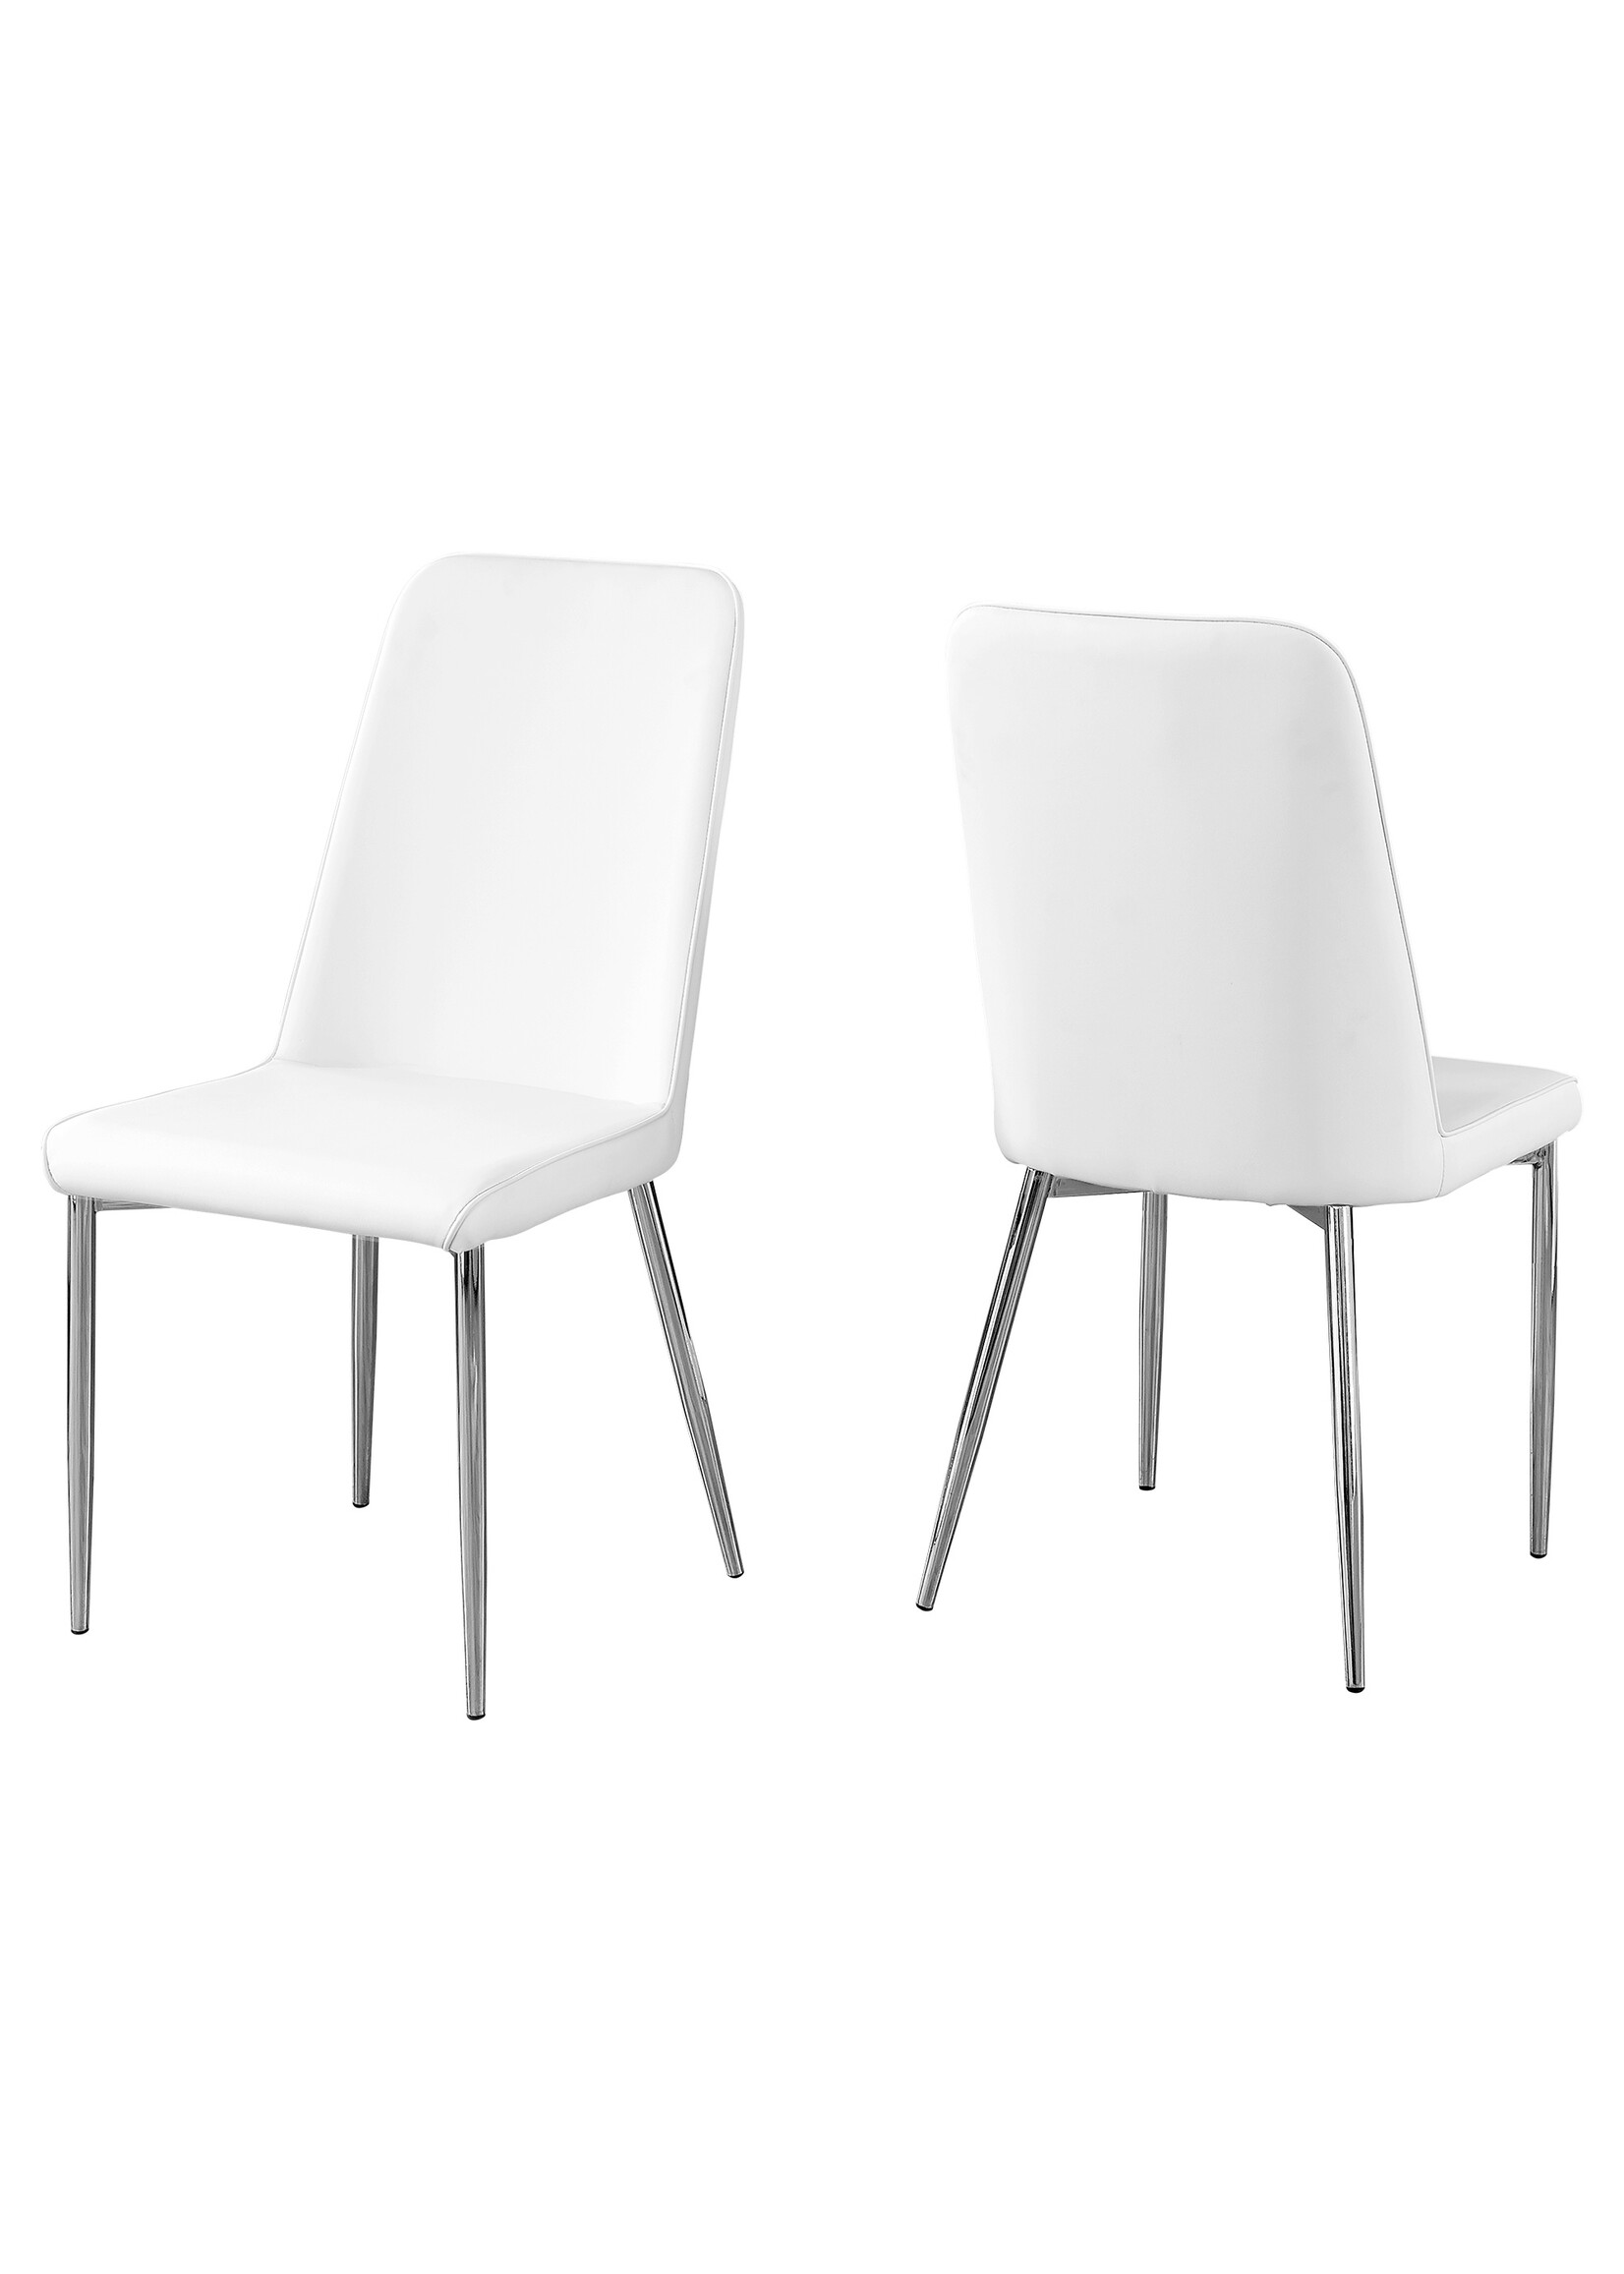 DINING CHAIR - 2PCS / 37"H / WHITE LEATHER-LOOK / CHROME